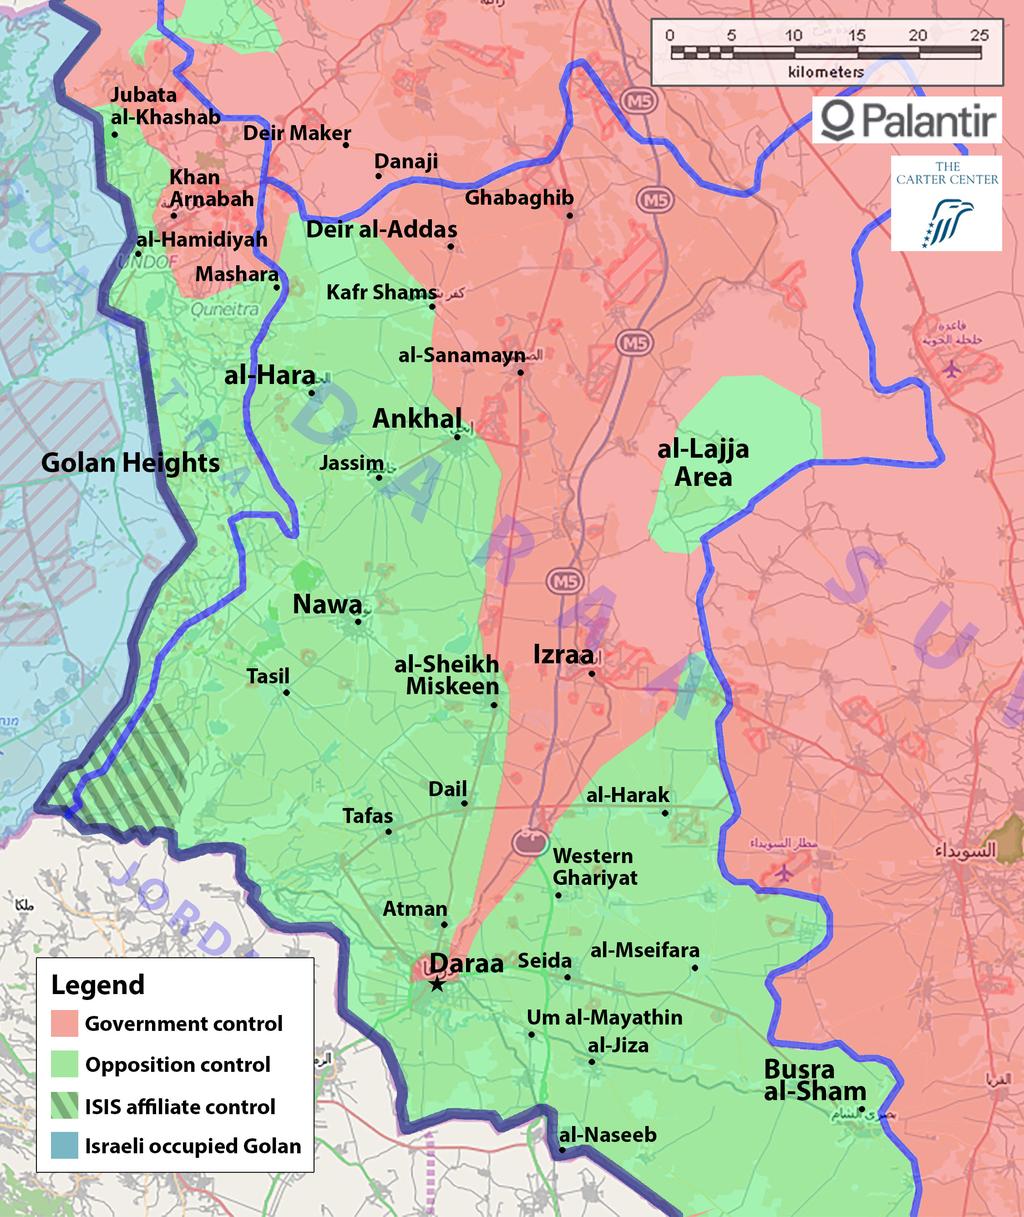 Daraa and Quneitra Figure 10: Areas of control in southern Syria as of late September 2015.